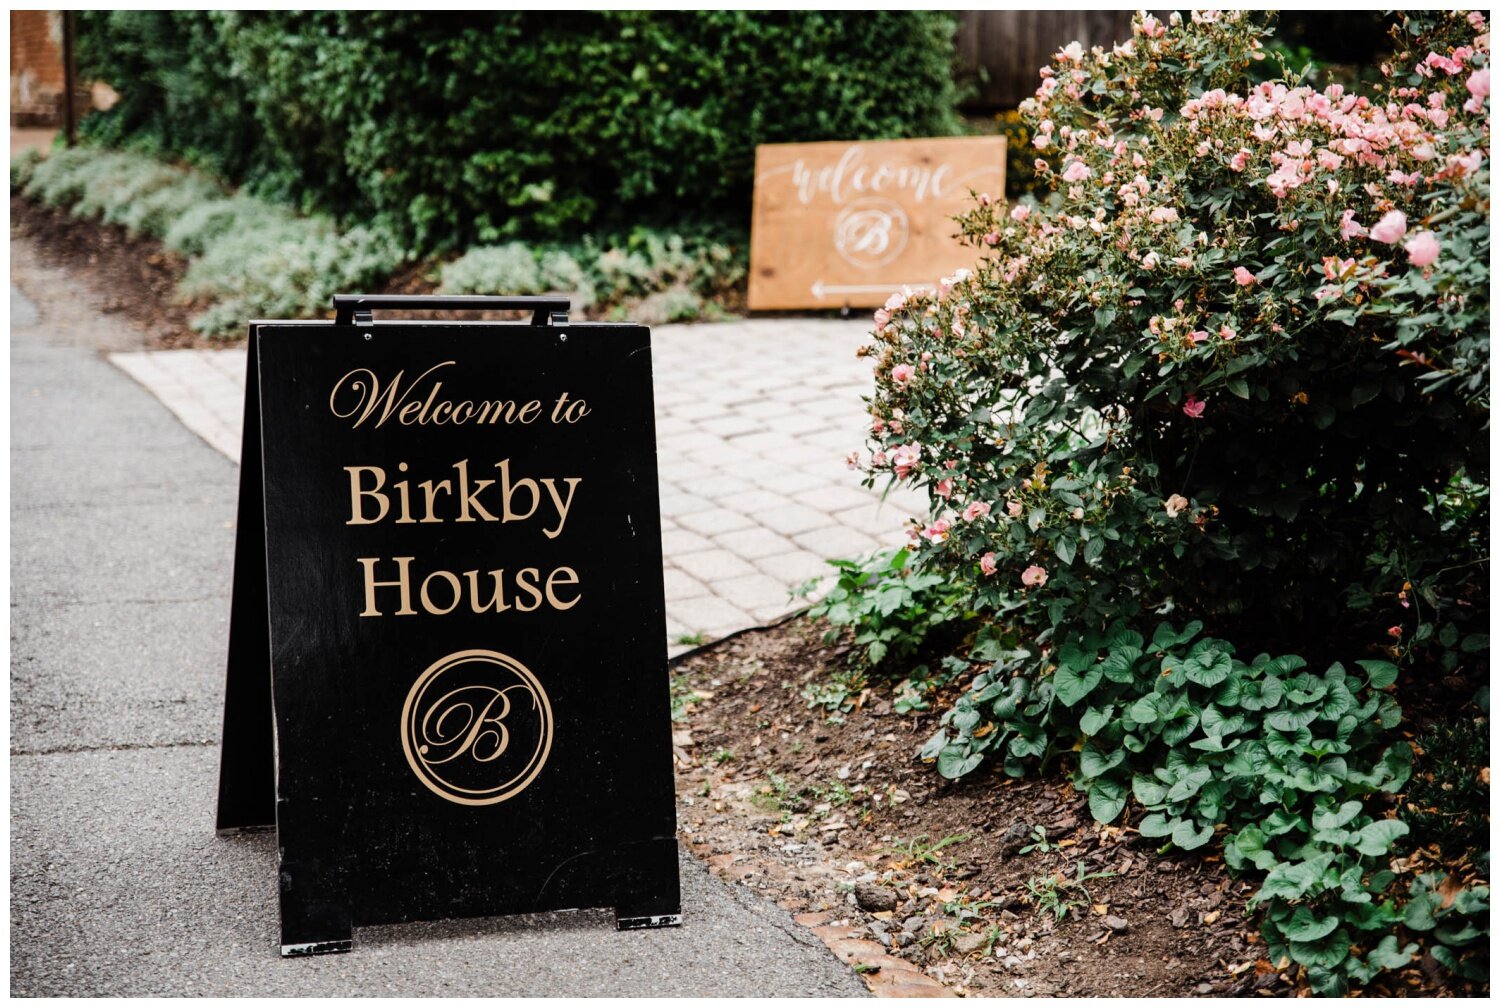 Birkby House Wedding reception welcome sign